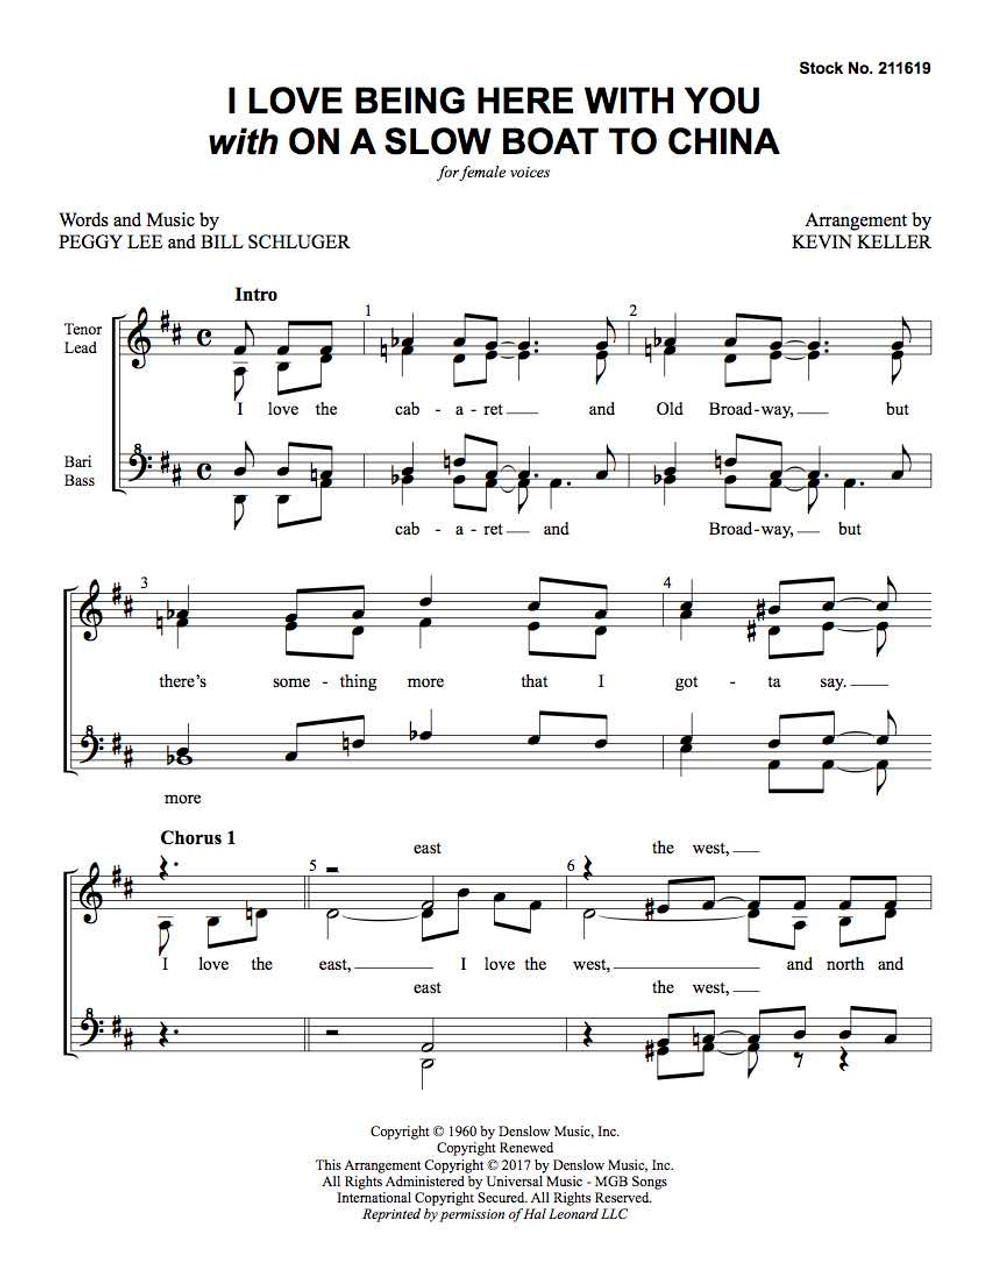 I Love Being Here With You / On A Slow Boat To China (Medley) (SSAA) (arr. Keller) = SPECIAL ORDER